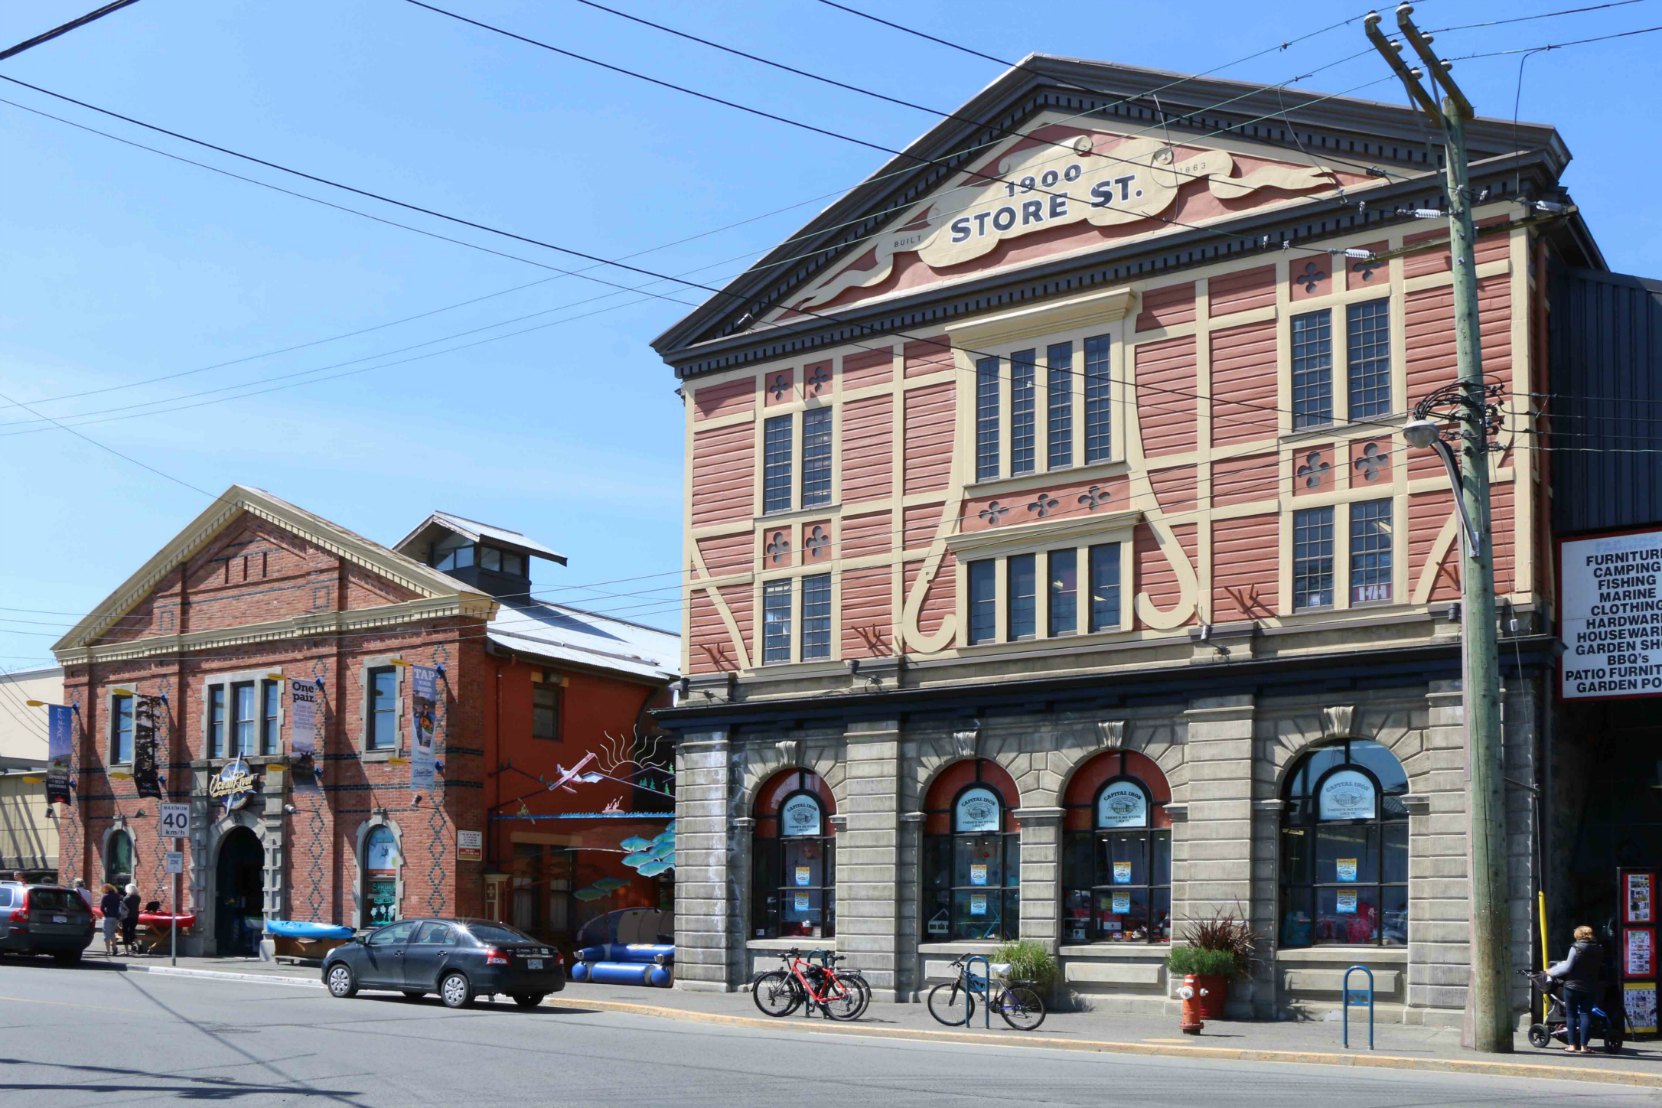 1824 Store Street (left), built in 1890, and 1900 Store Street (right), built in 1862. (photo by Victoria Online Sightseeing Tours)